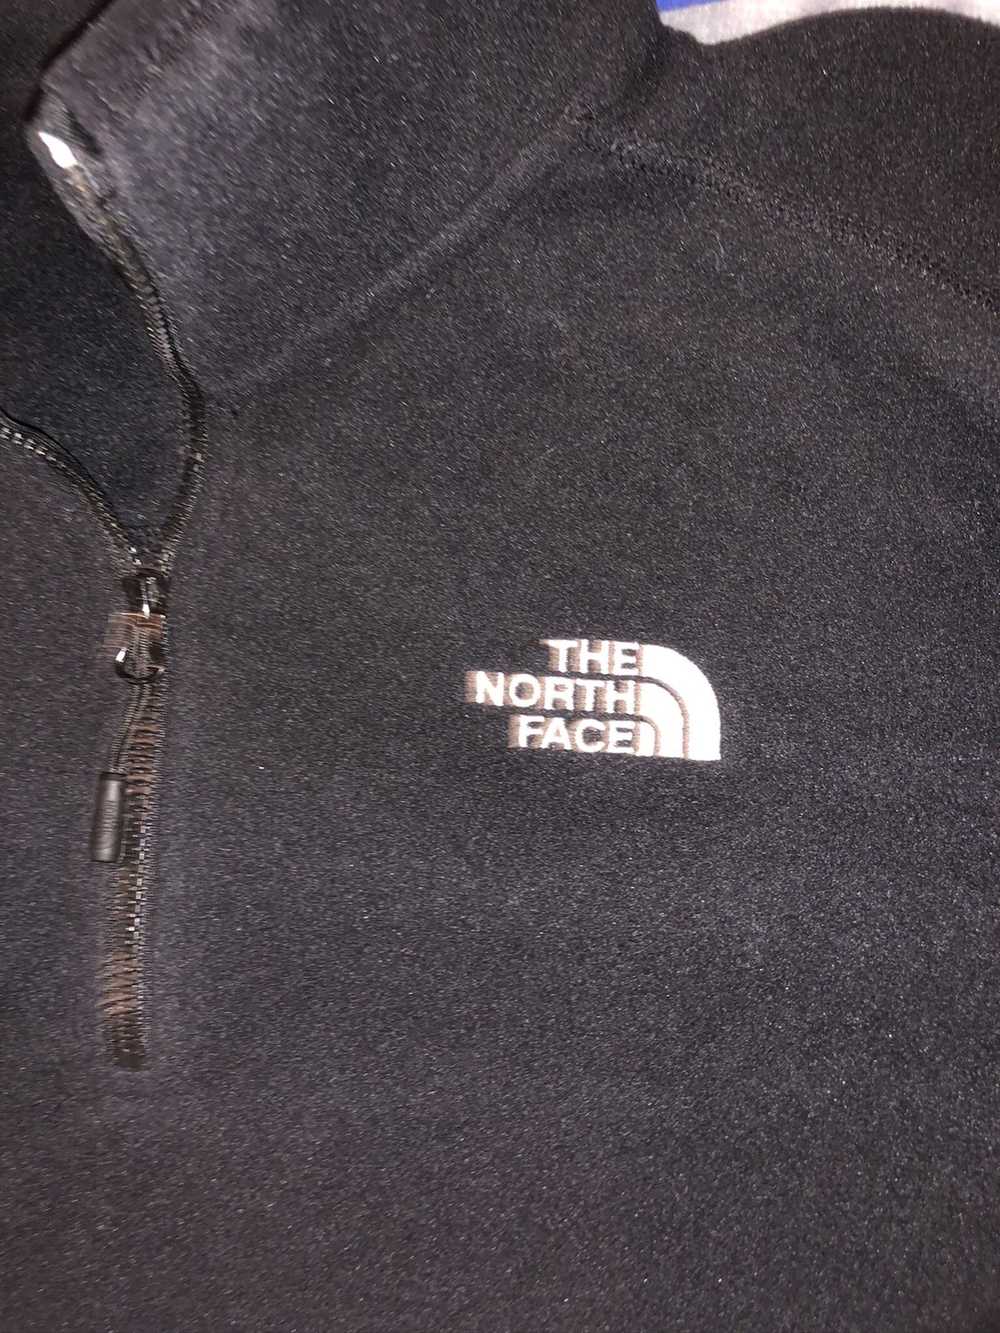 The North Face 3/4 Zip-up Fleece - image 2